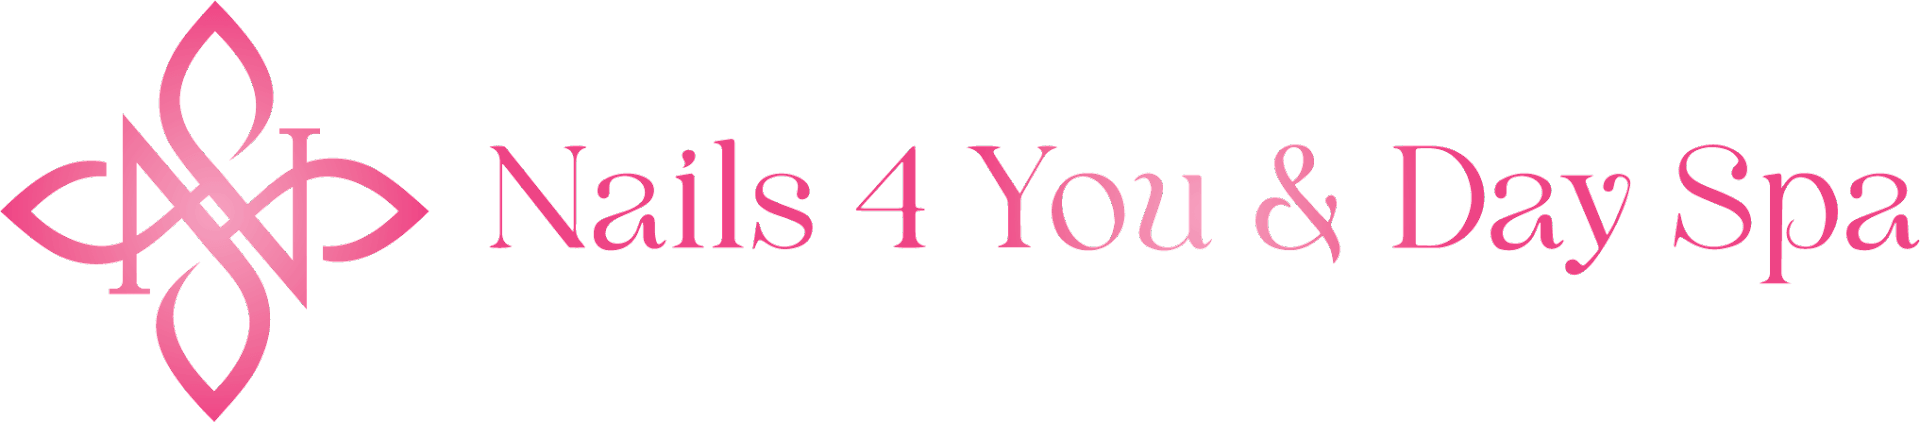 Nails 4 You & Day Spa